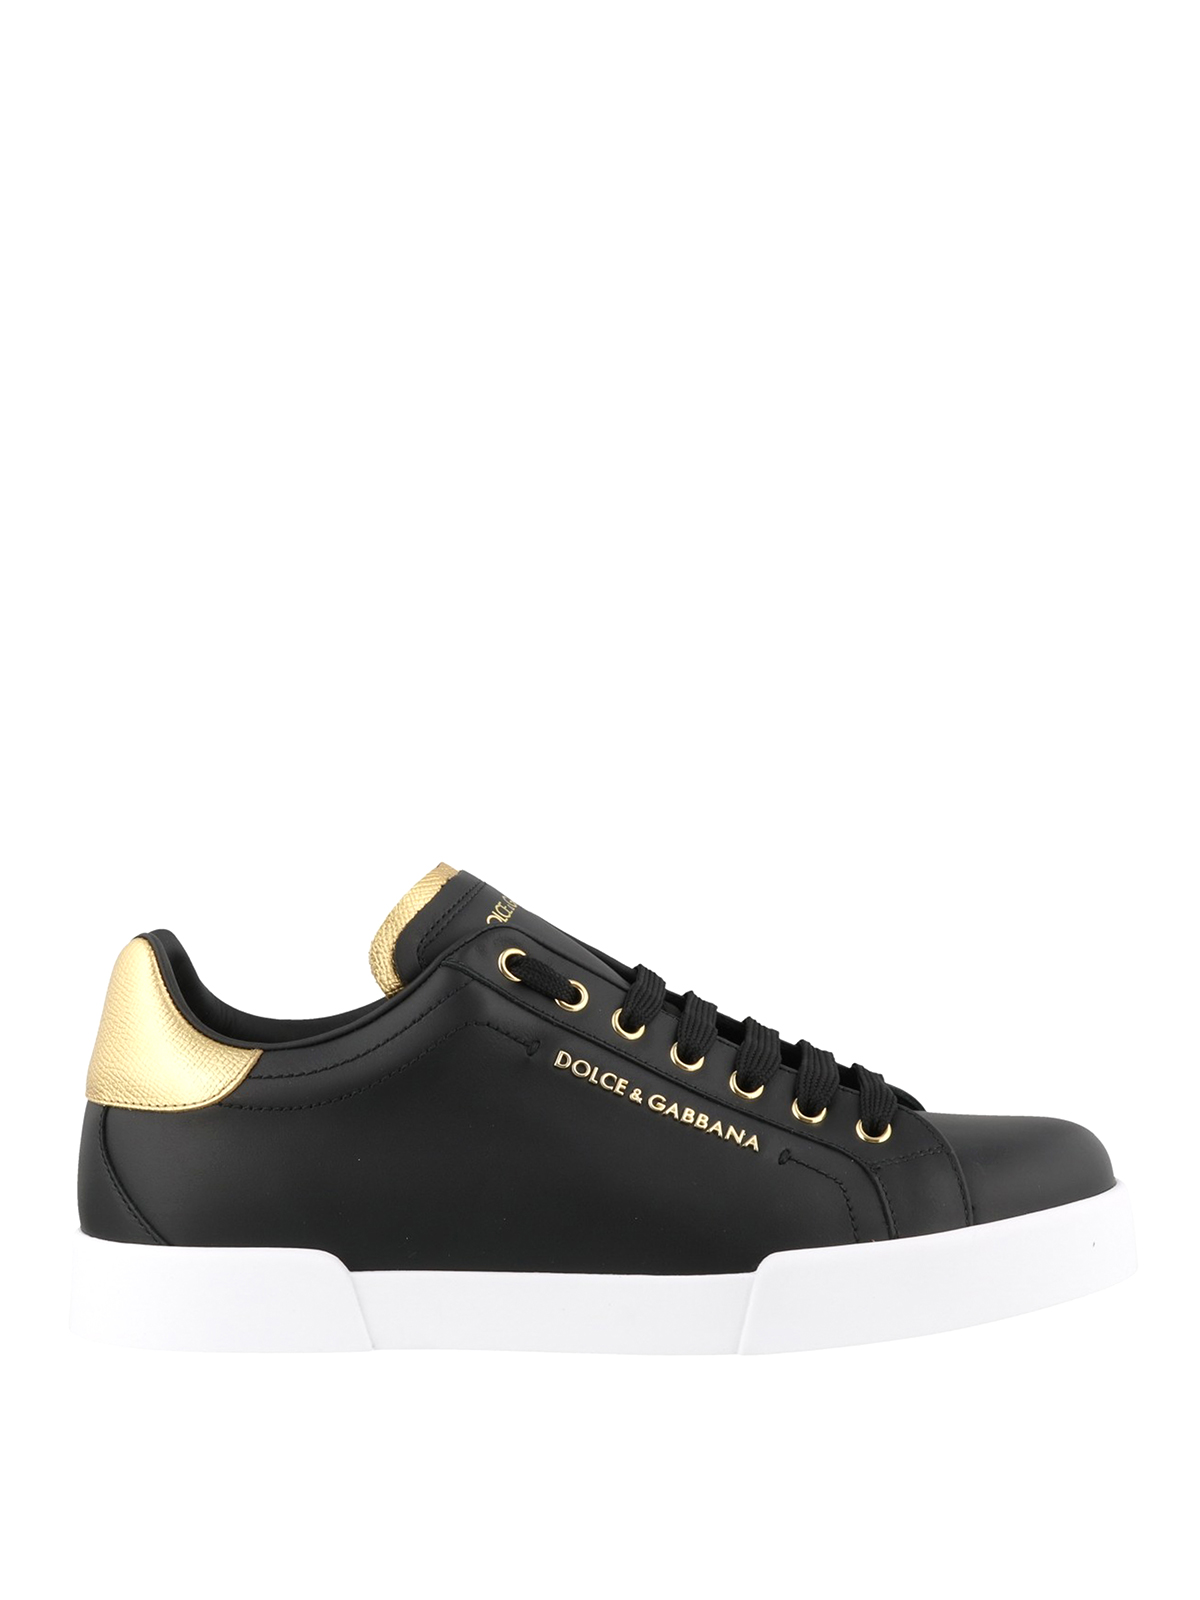 dolce gabbana sneakers gold